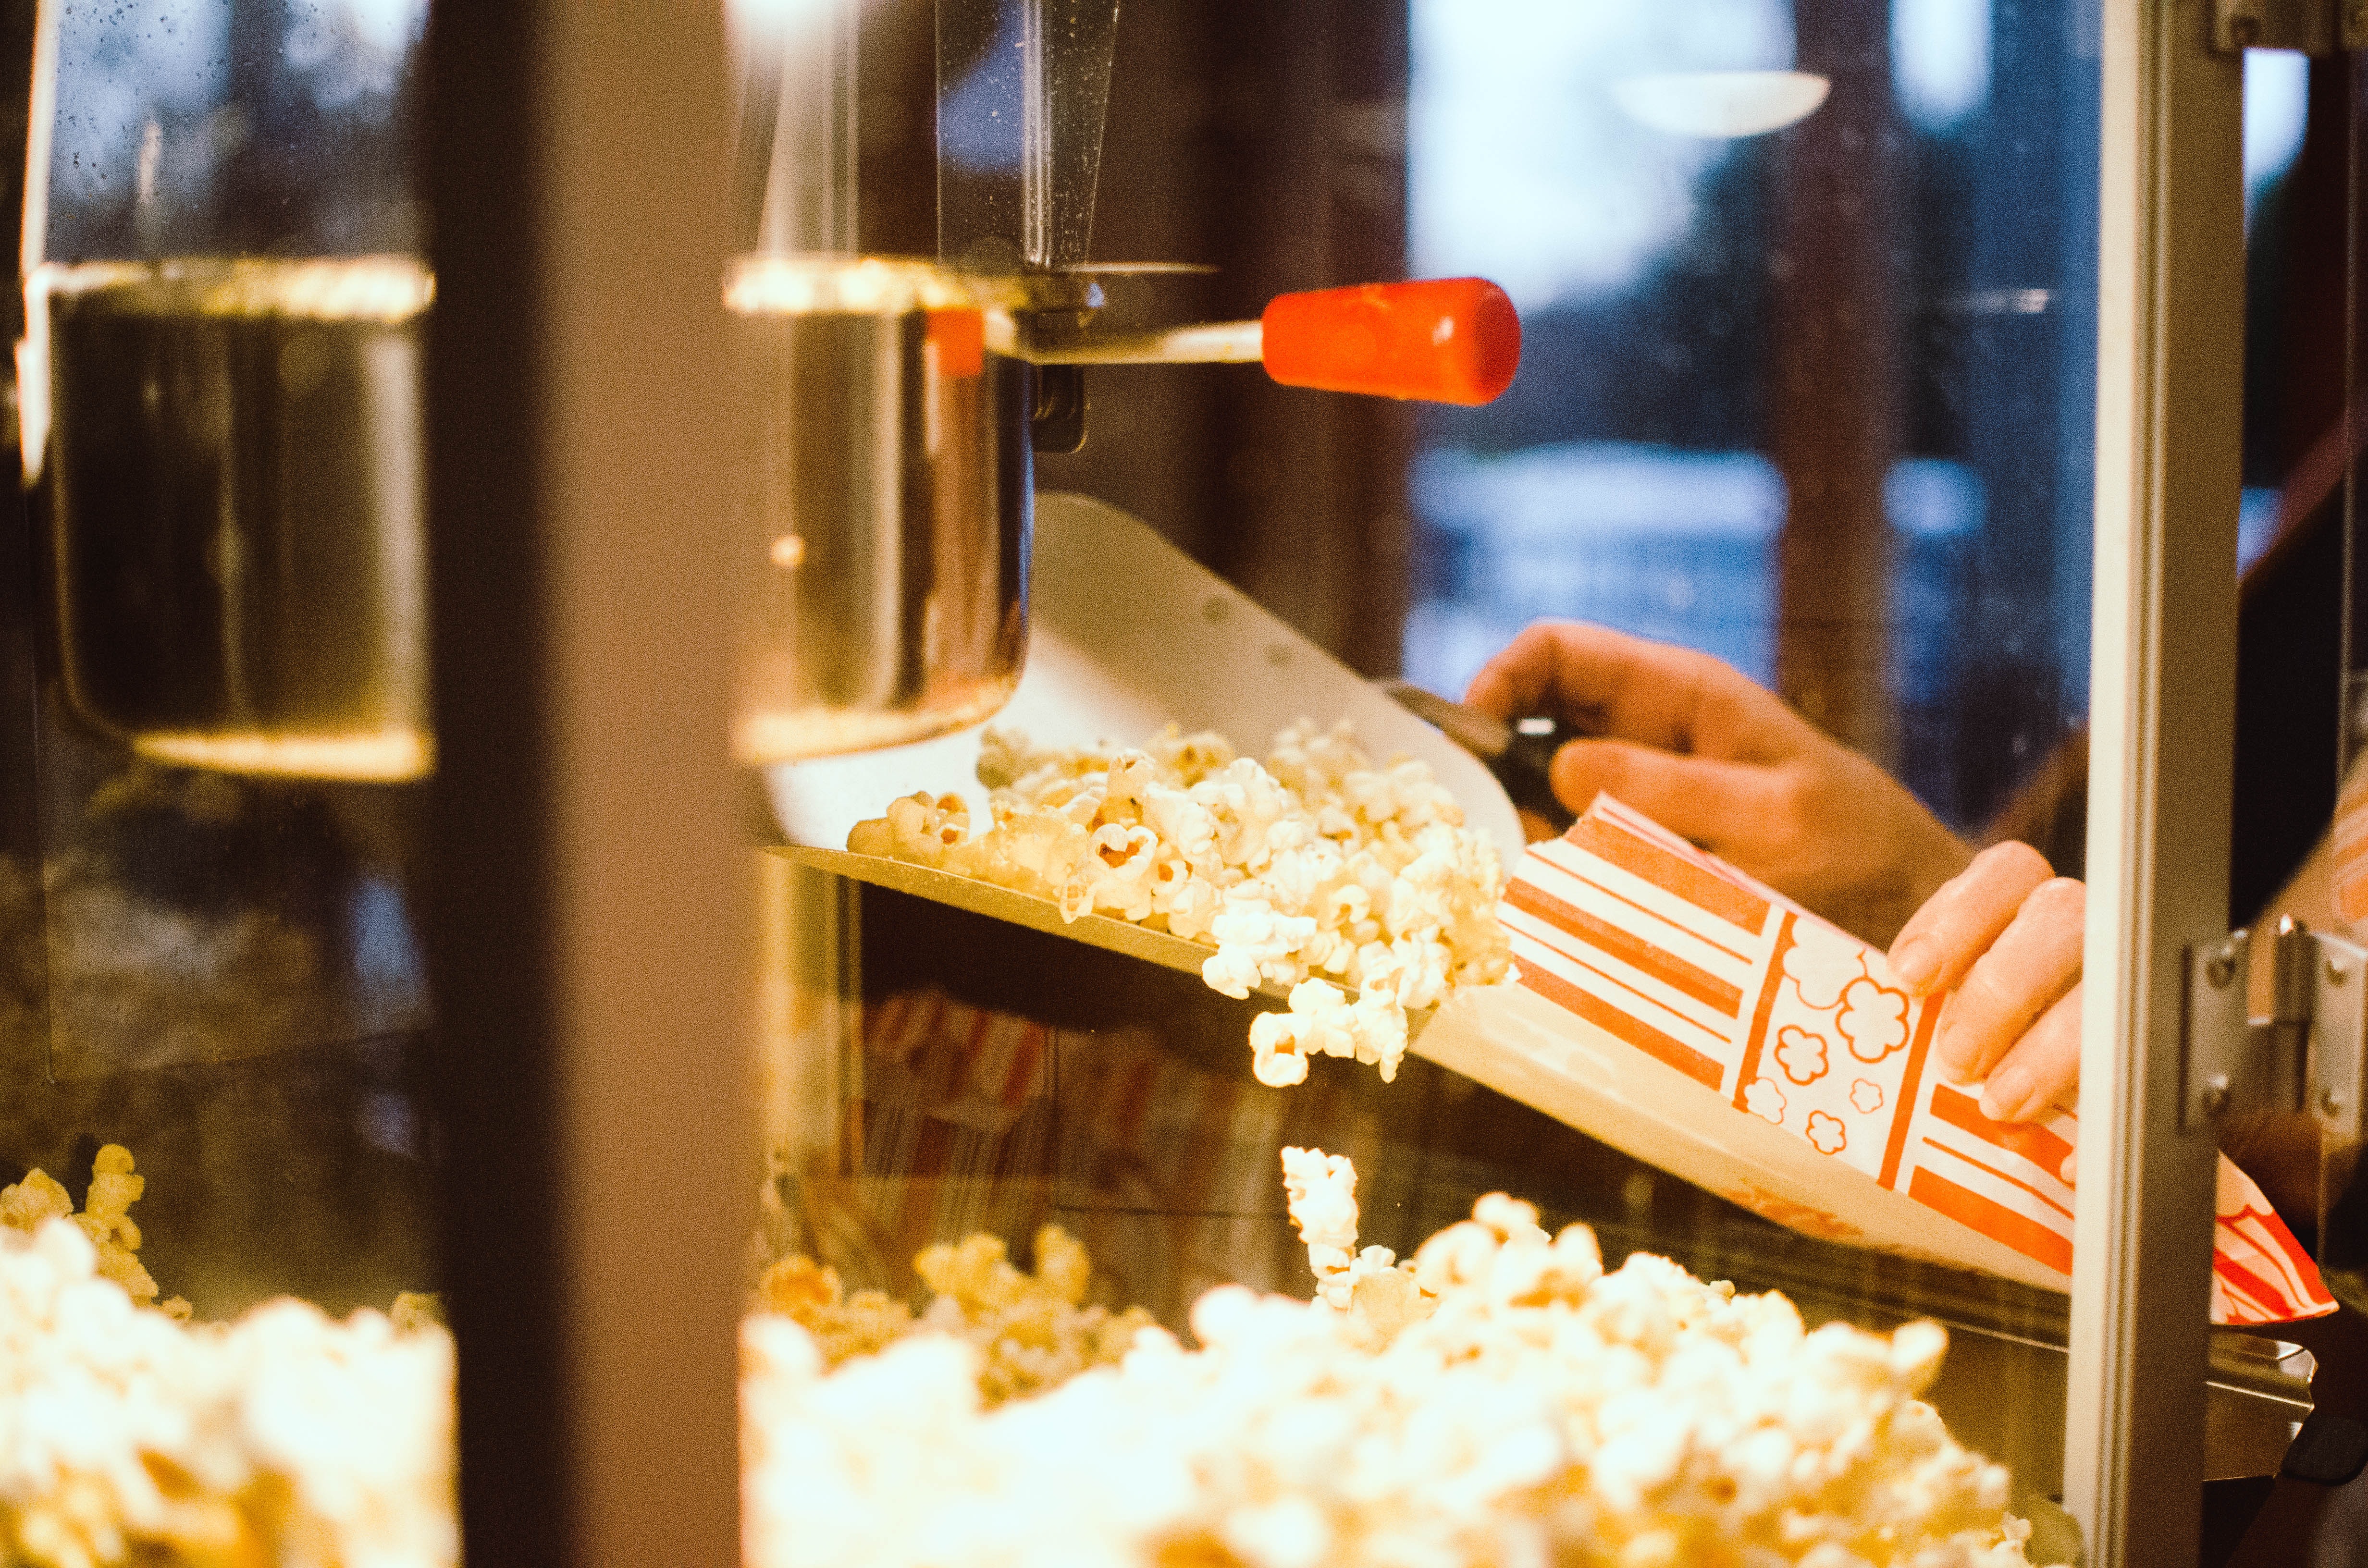 Photo of hands scooping popcorn into a bag